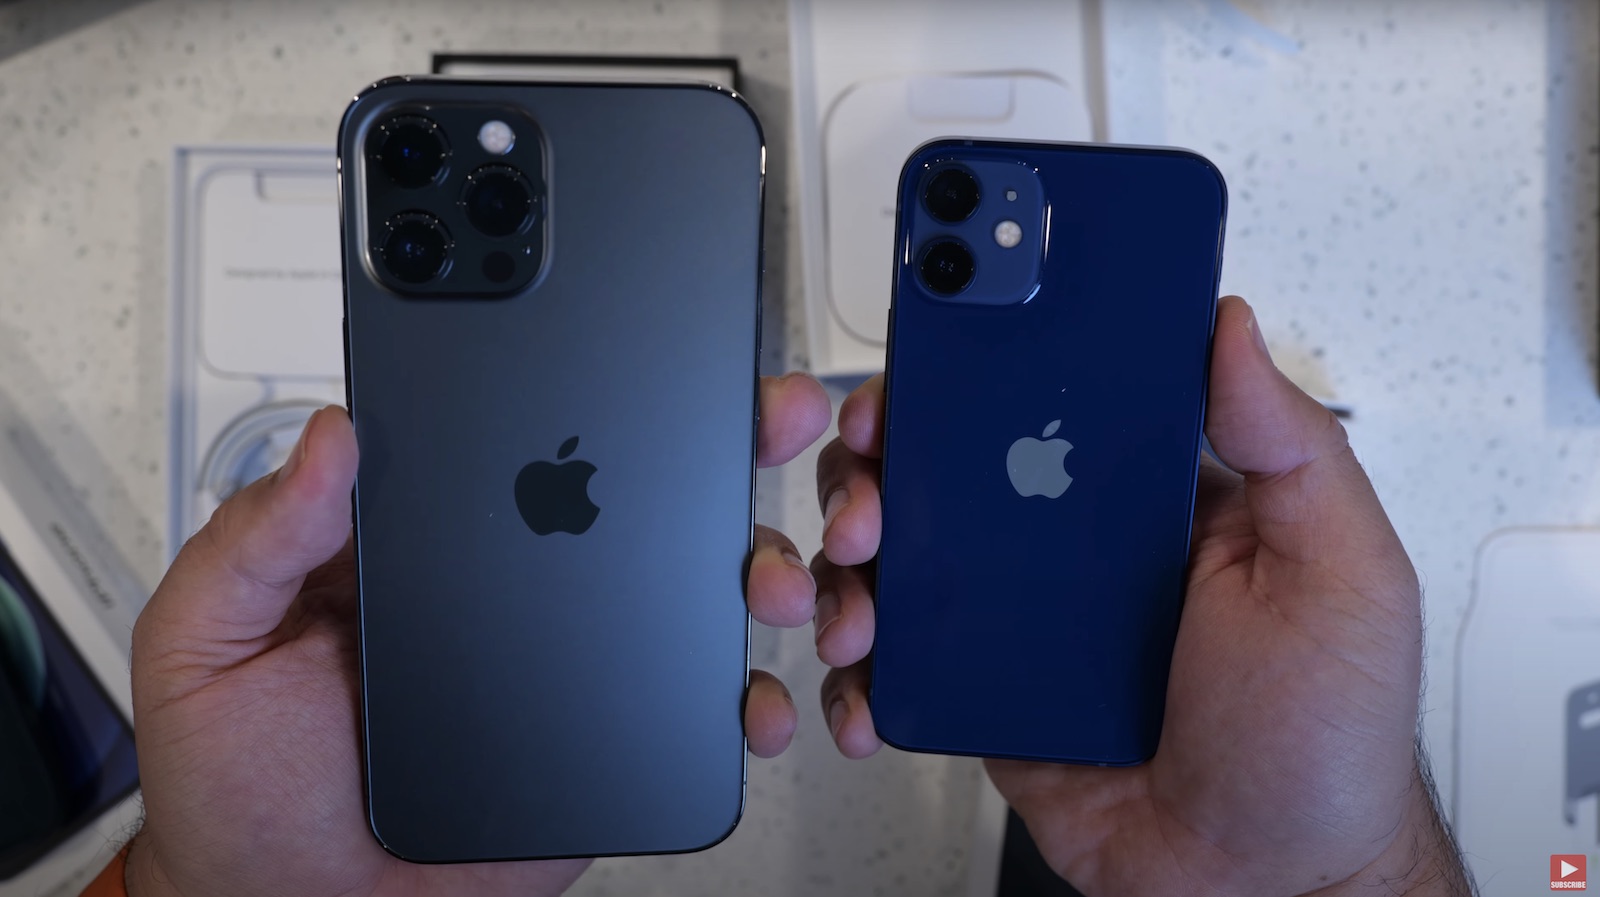 Watch: iPhone 12 Mini, iPhone 12 Pro Max, MagSafe Duo Charger, and Leather  Sleeve Unboxing Videos and Reviews | MacRumors Forums